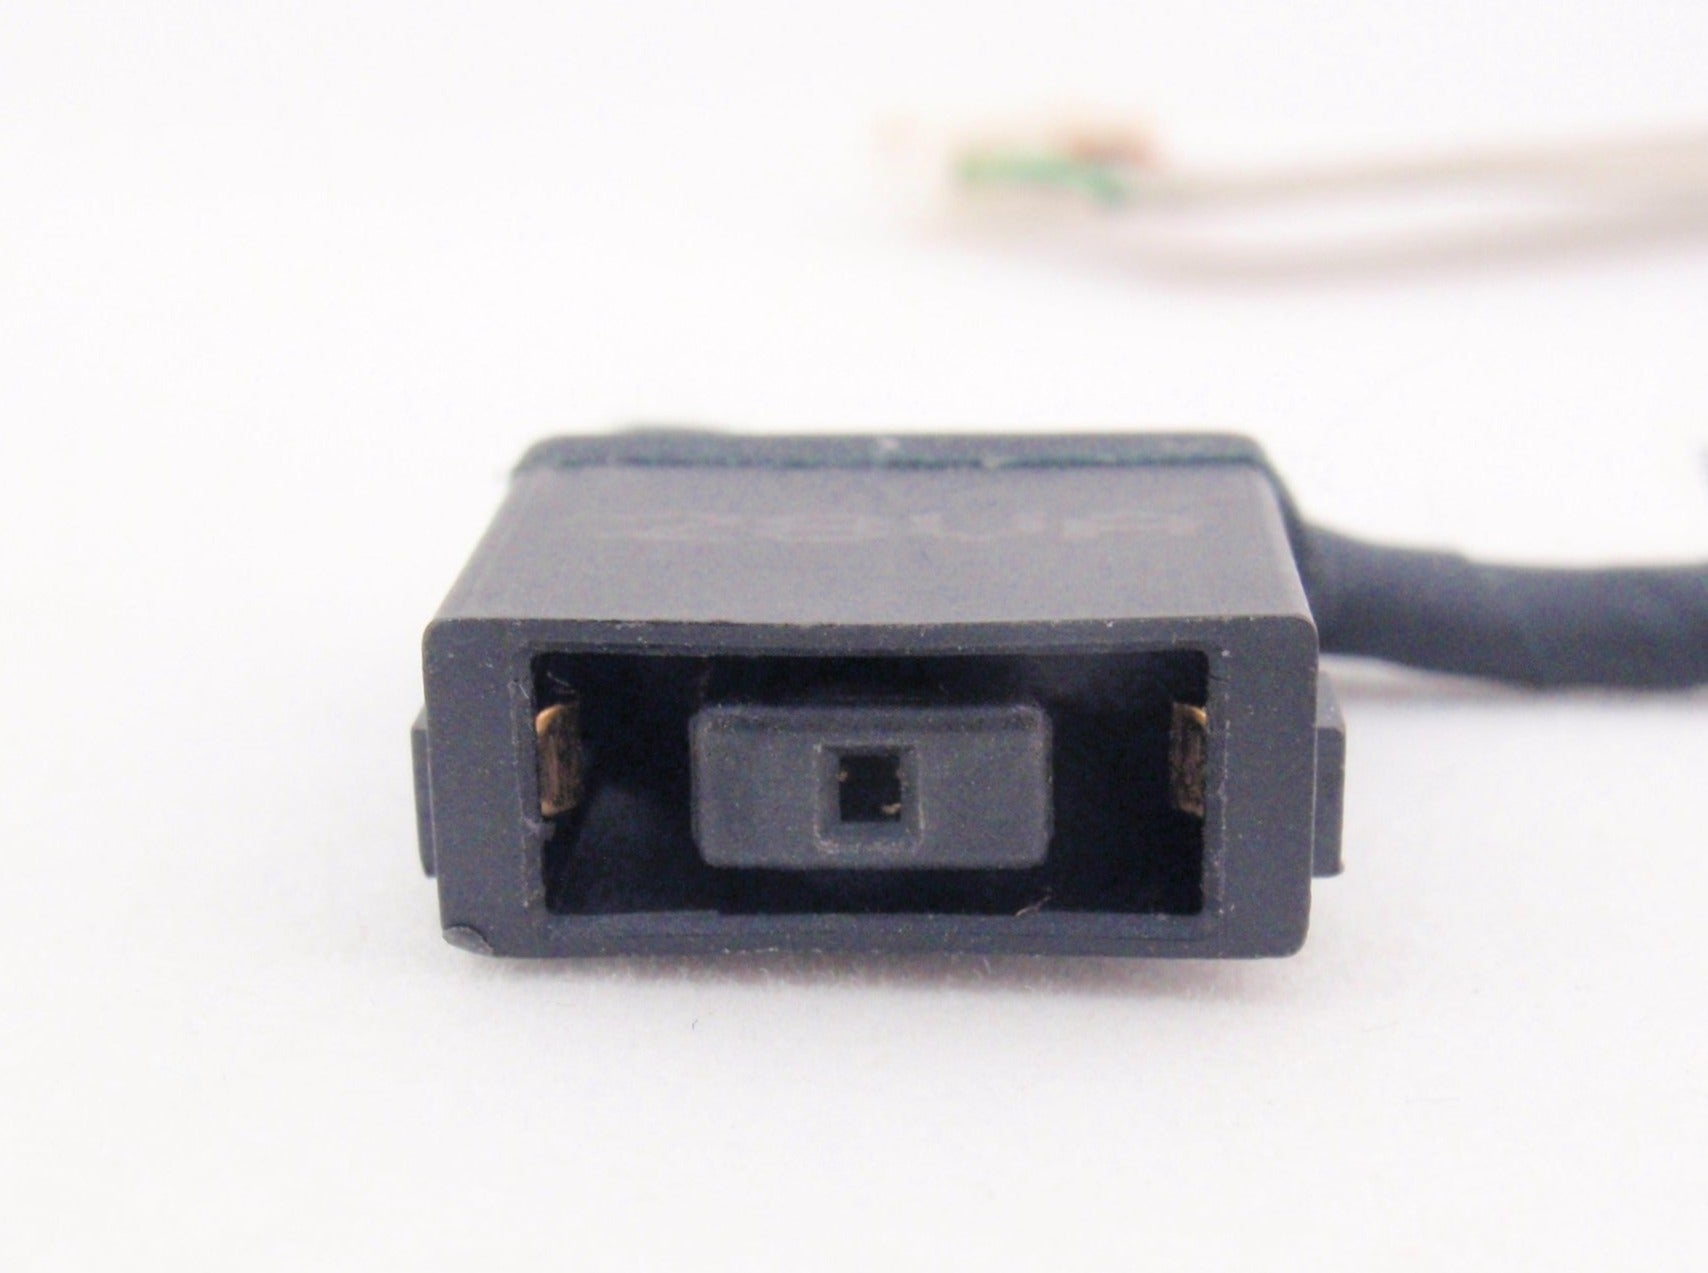 Lenovo New DC In Power Jack Charging Port Cable ThinkPad X1 Helix MT 3688 3697 3698 3701 50.4WW04.001 04X0509